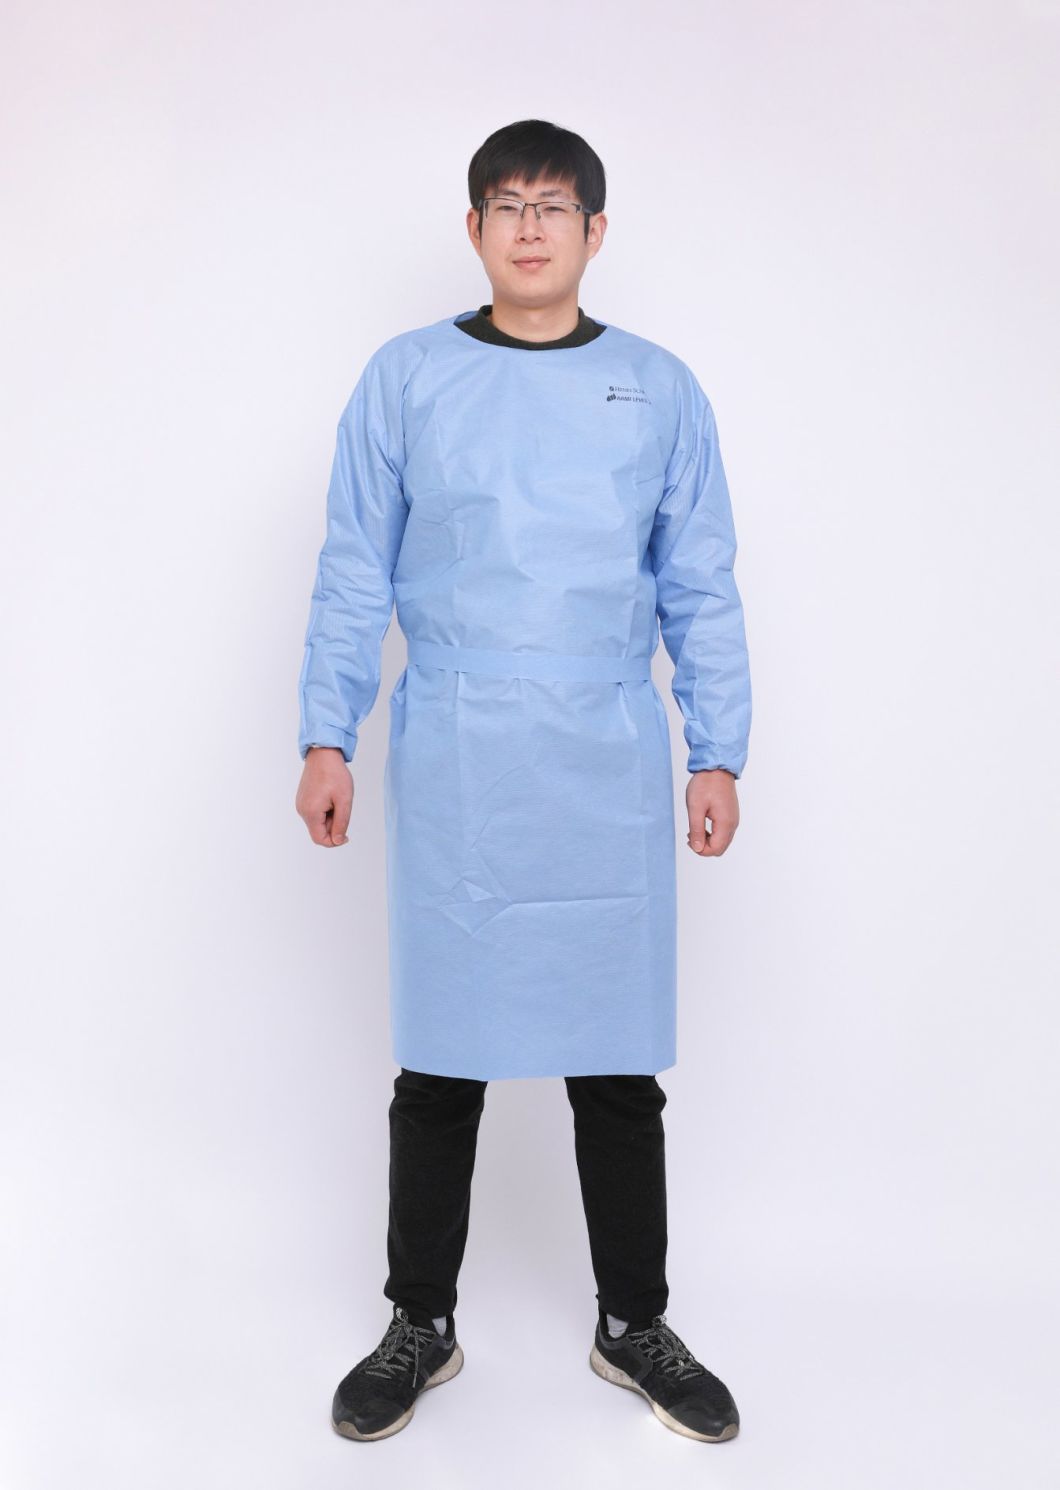 Safety Reflective Work Uniform Workwear Overall Equipment Personable Protective Disposable Protection Overall